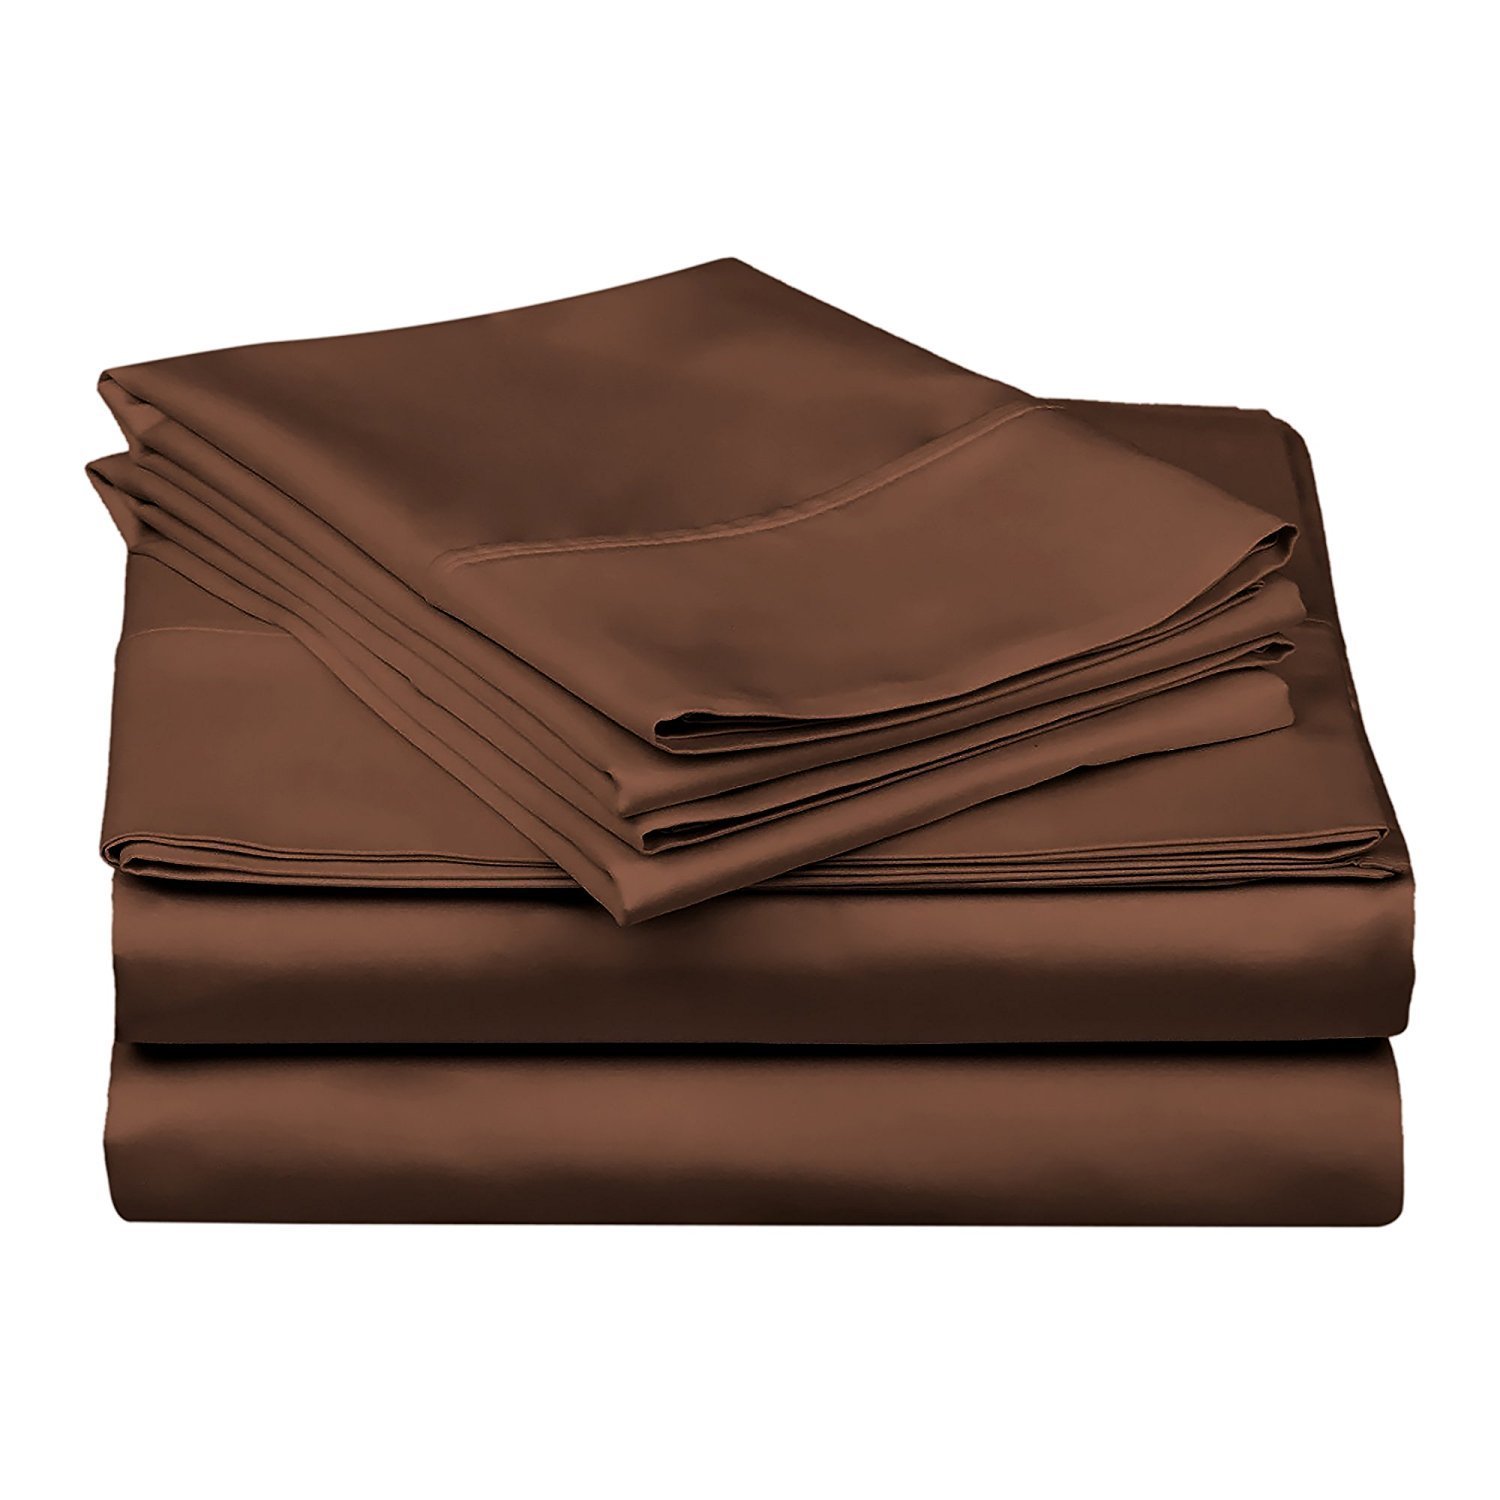 GoLinens Luxury 300 Thread Count 100% Certified Premium Extra Long Staple Giza Combed Cotton Bed Sheet Set - Plain- Chocolate